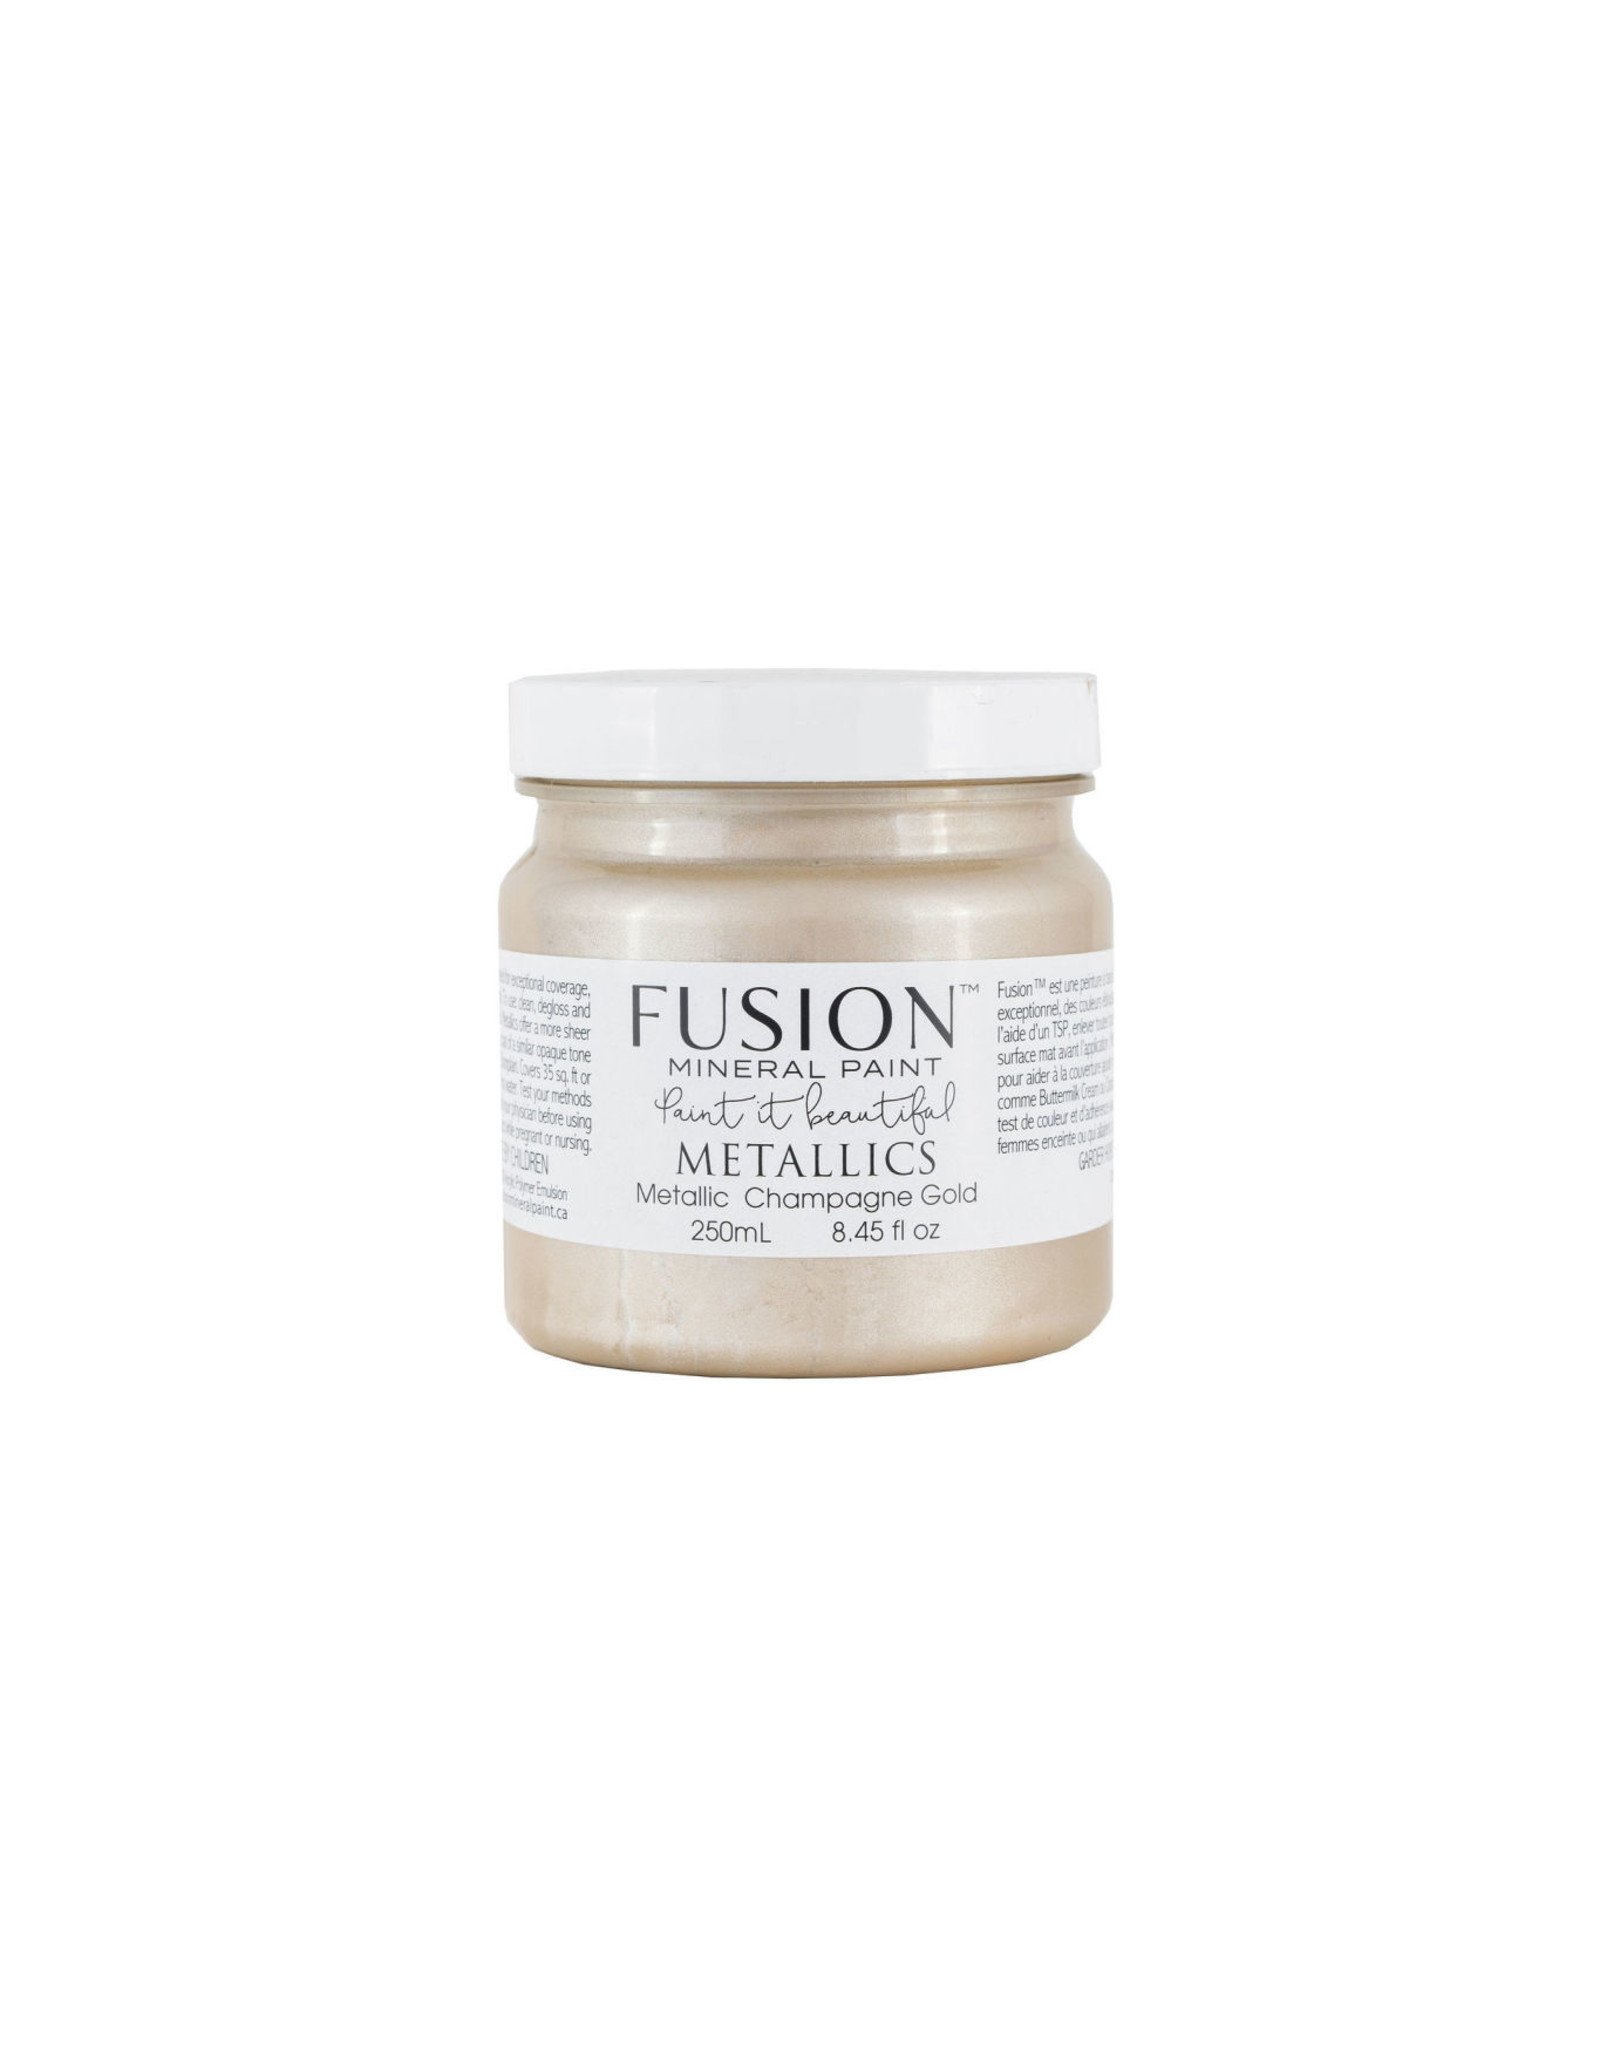 Fusion Mineral Paint Metallic 250ml Champagne Gold